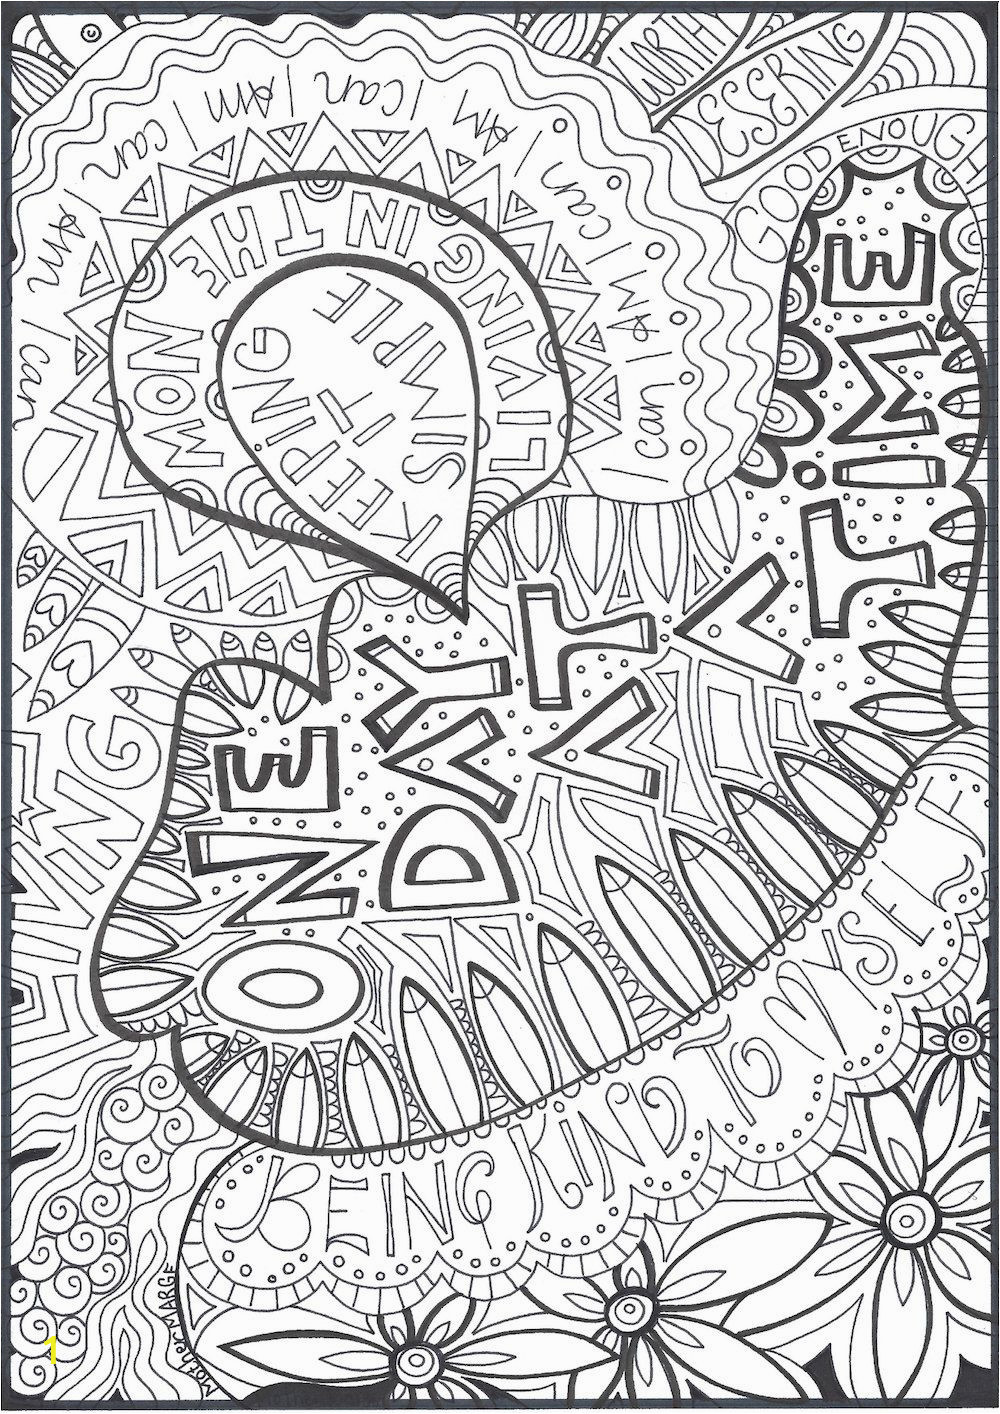 Meditation Coloring Pages Free E Day at A Time Coloring Page Adult by